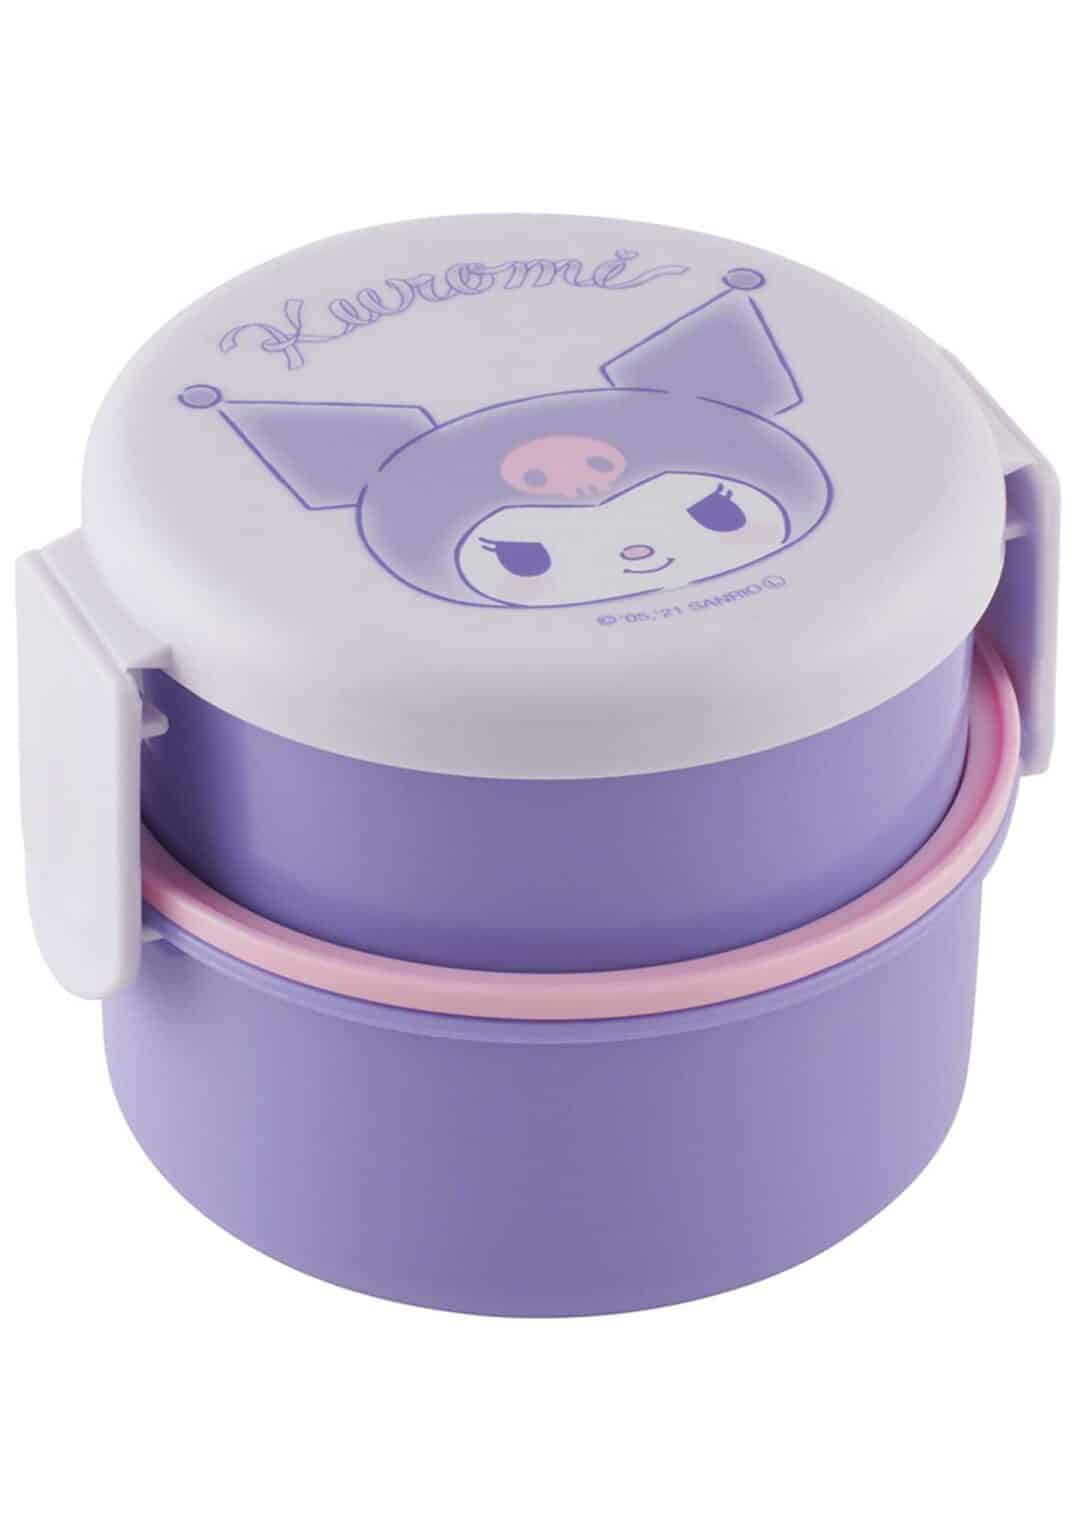 Skater Kuromi 2-Layered Round Bento Lunch Box with Fork